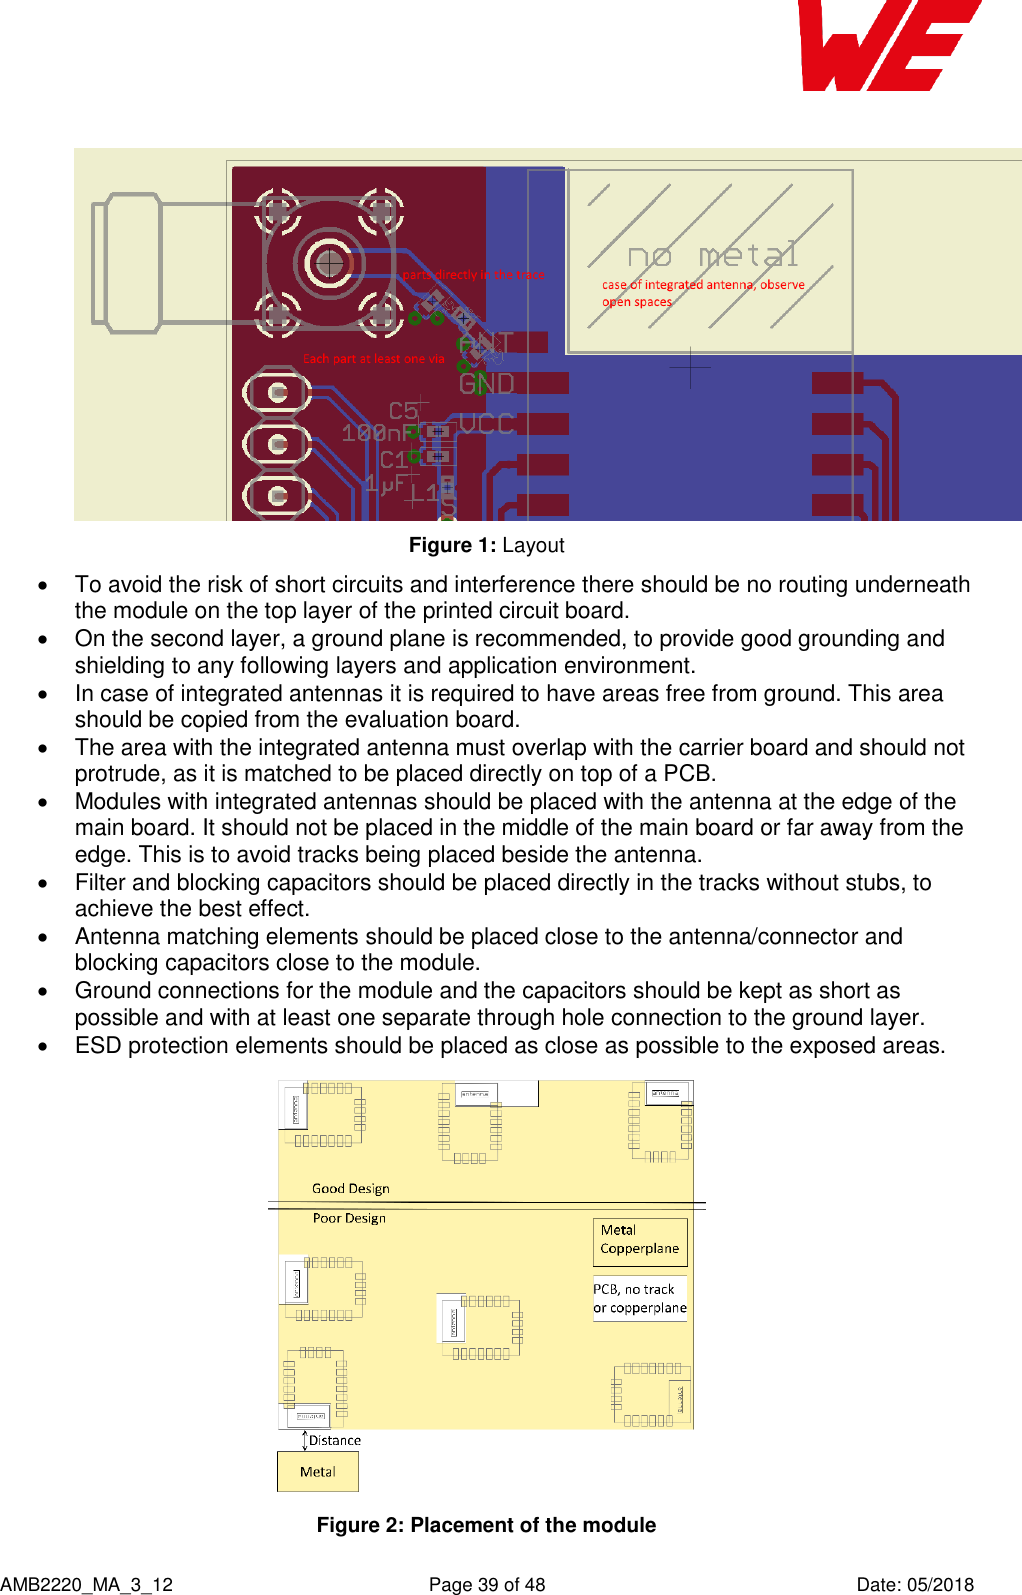    AMB2220_MA_3_12  Page 39 of 48  Date: 05/2018  Figure 1: Layout   To avoid the risk of short circuits and interference there should be no routing underneath the module on the top layer of the printed circuit board.   On the second layer, a ground plane is recommended, to provide good grounding and shielding to any following layers and application environment.    In case of integrated antennas it is required to have areas free from ground. This area should be copied from the evaluation board.   The area with the integrated antenna must overlap with the carrier board and should not protrude, as it is matched to be placed directly on top of a PCB.   Modules with integrated antennas should be placed with the antenna at the edge of the main board. It should not be placed in the middle of the main board or far away from the edge. This is to avoid tracks being placed beside the antenna.    Filter and blocking capacitors should be placed directly in the tracks without stubs, to achieve the best effect.   Antenna matching elements should be placed close to the antenna/connector and blocking capacitors close to the module.   Ground connections for the module and the capacitors should be kept as short as possible and with at least one separate through hole connection to the ground layer.   ESD protection elements should be placed as close as possible to the exposed areas.  Figure 2: Placement of the module 